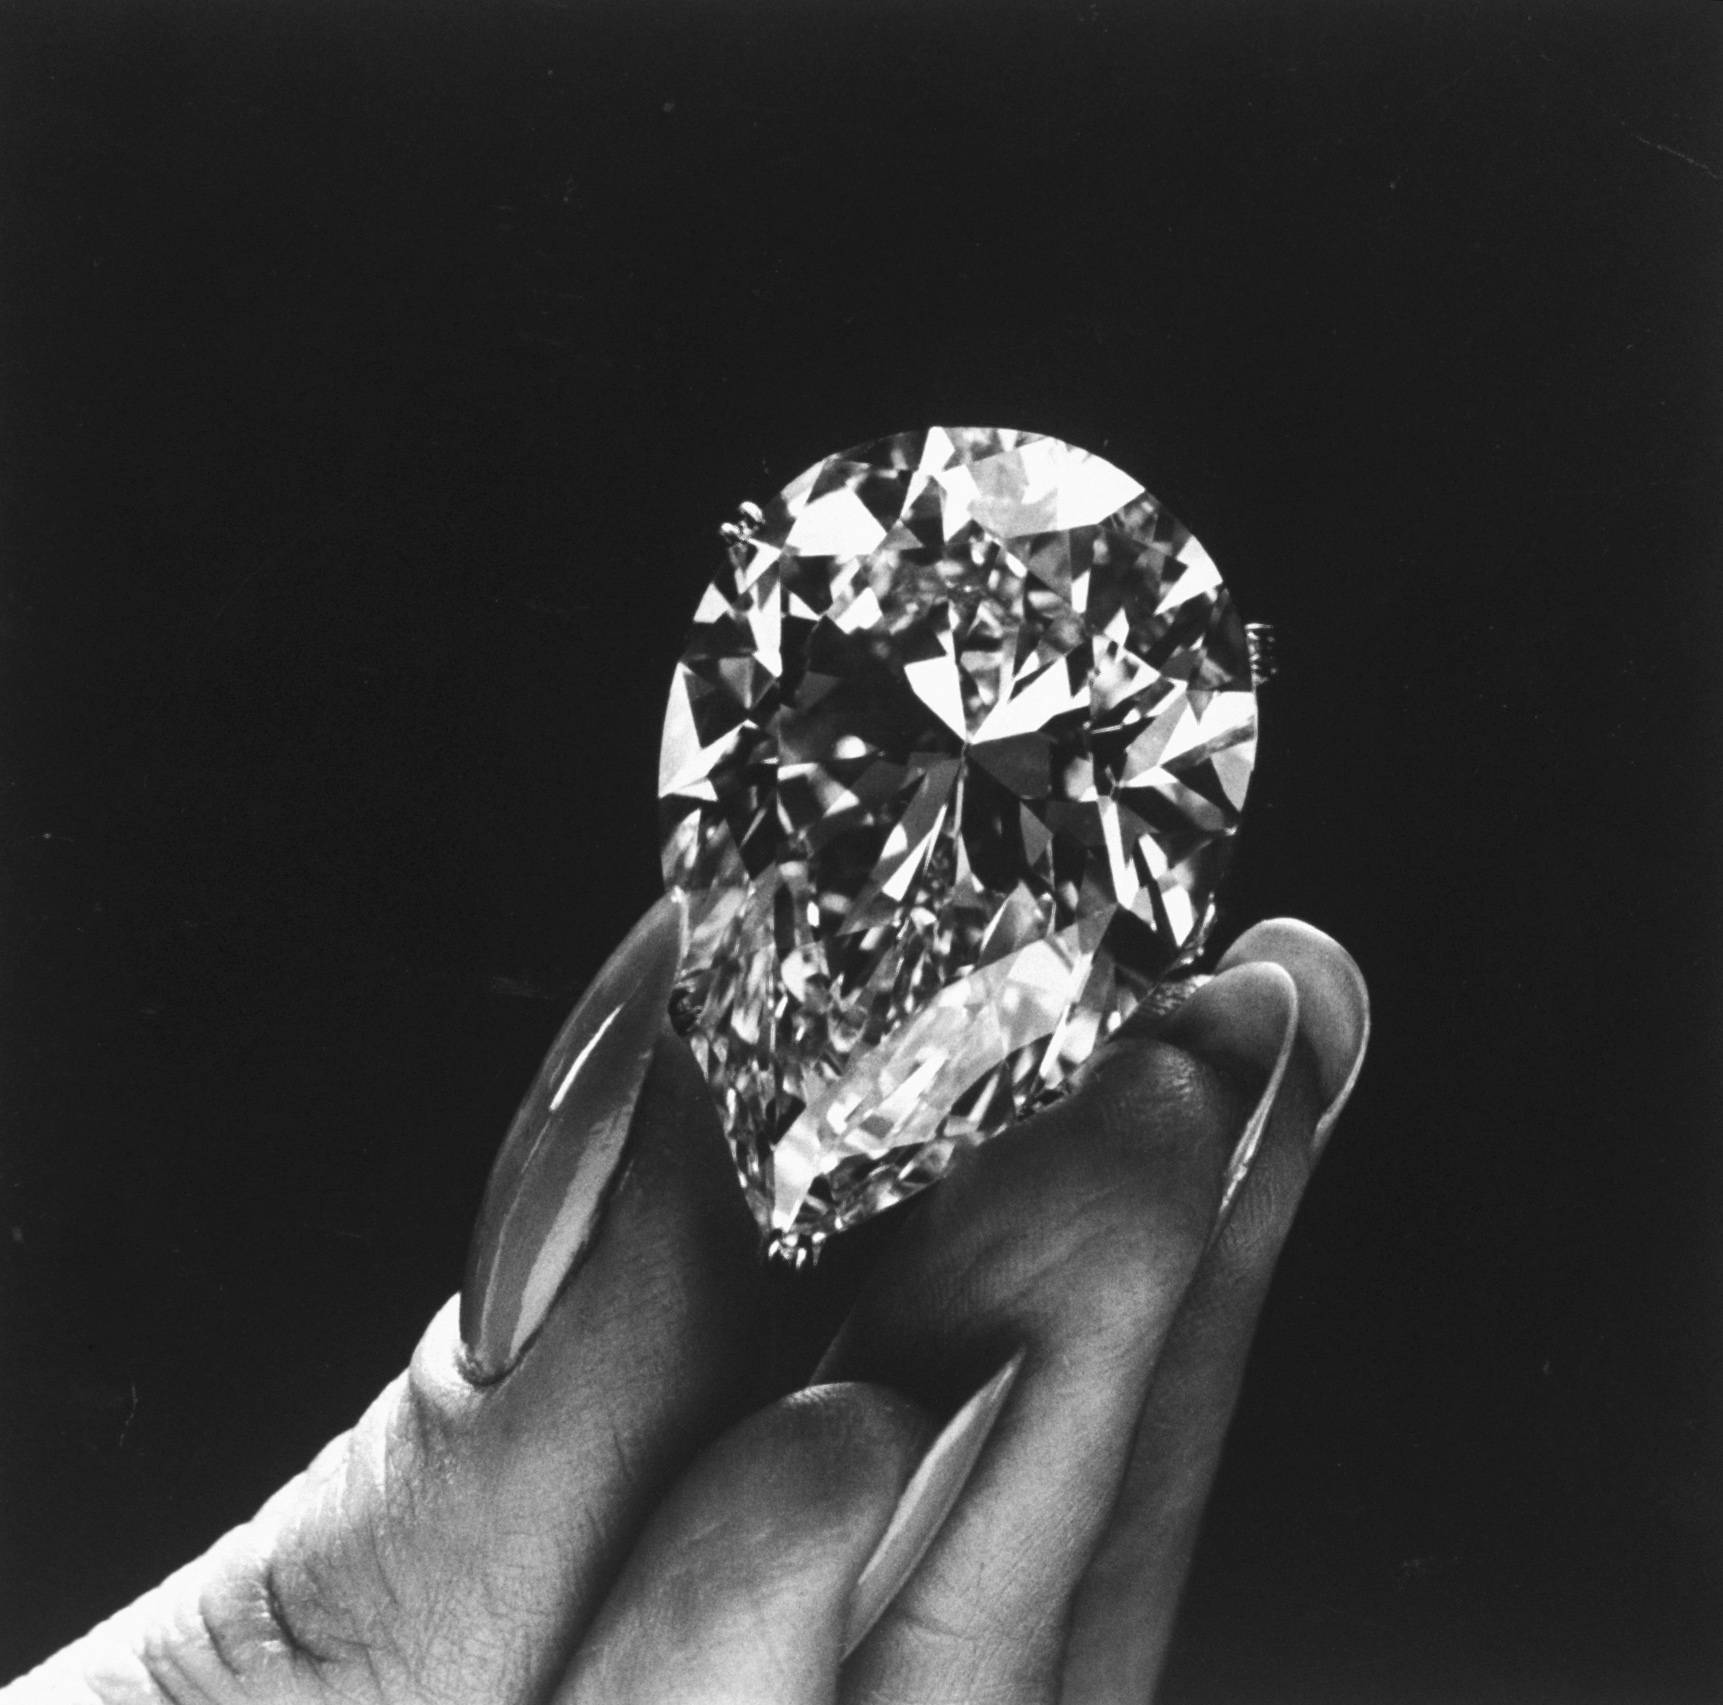 Actress Elizabeth Taylor's diamond, which was bought from Cartiers, being displayed. (Photo by Yale Joel//Time Life Pictures/Getty Images)